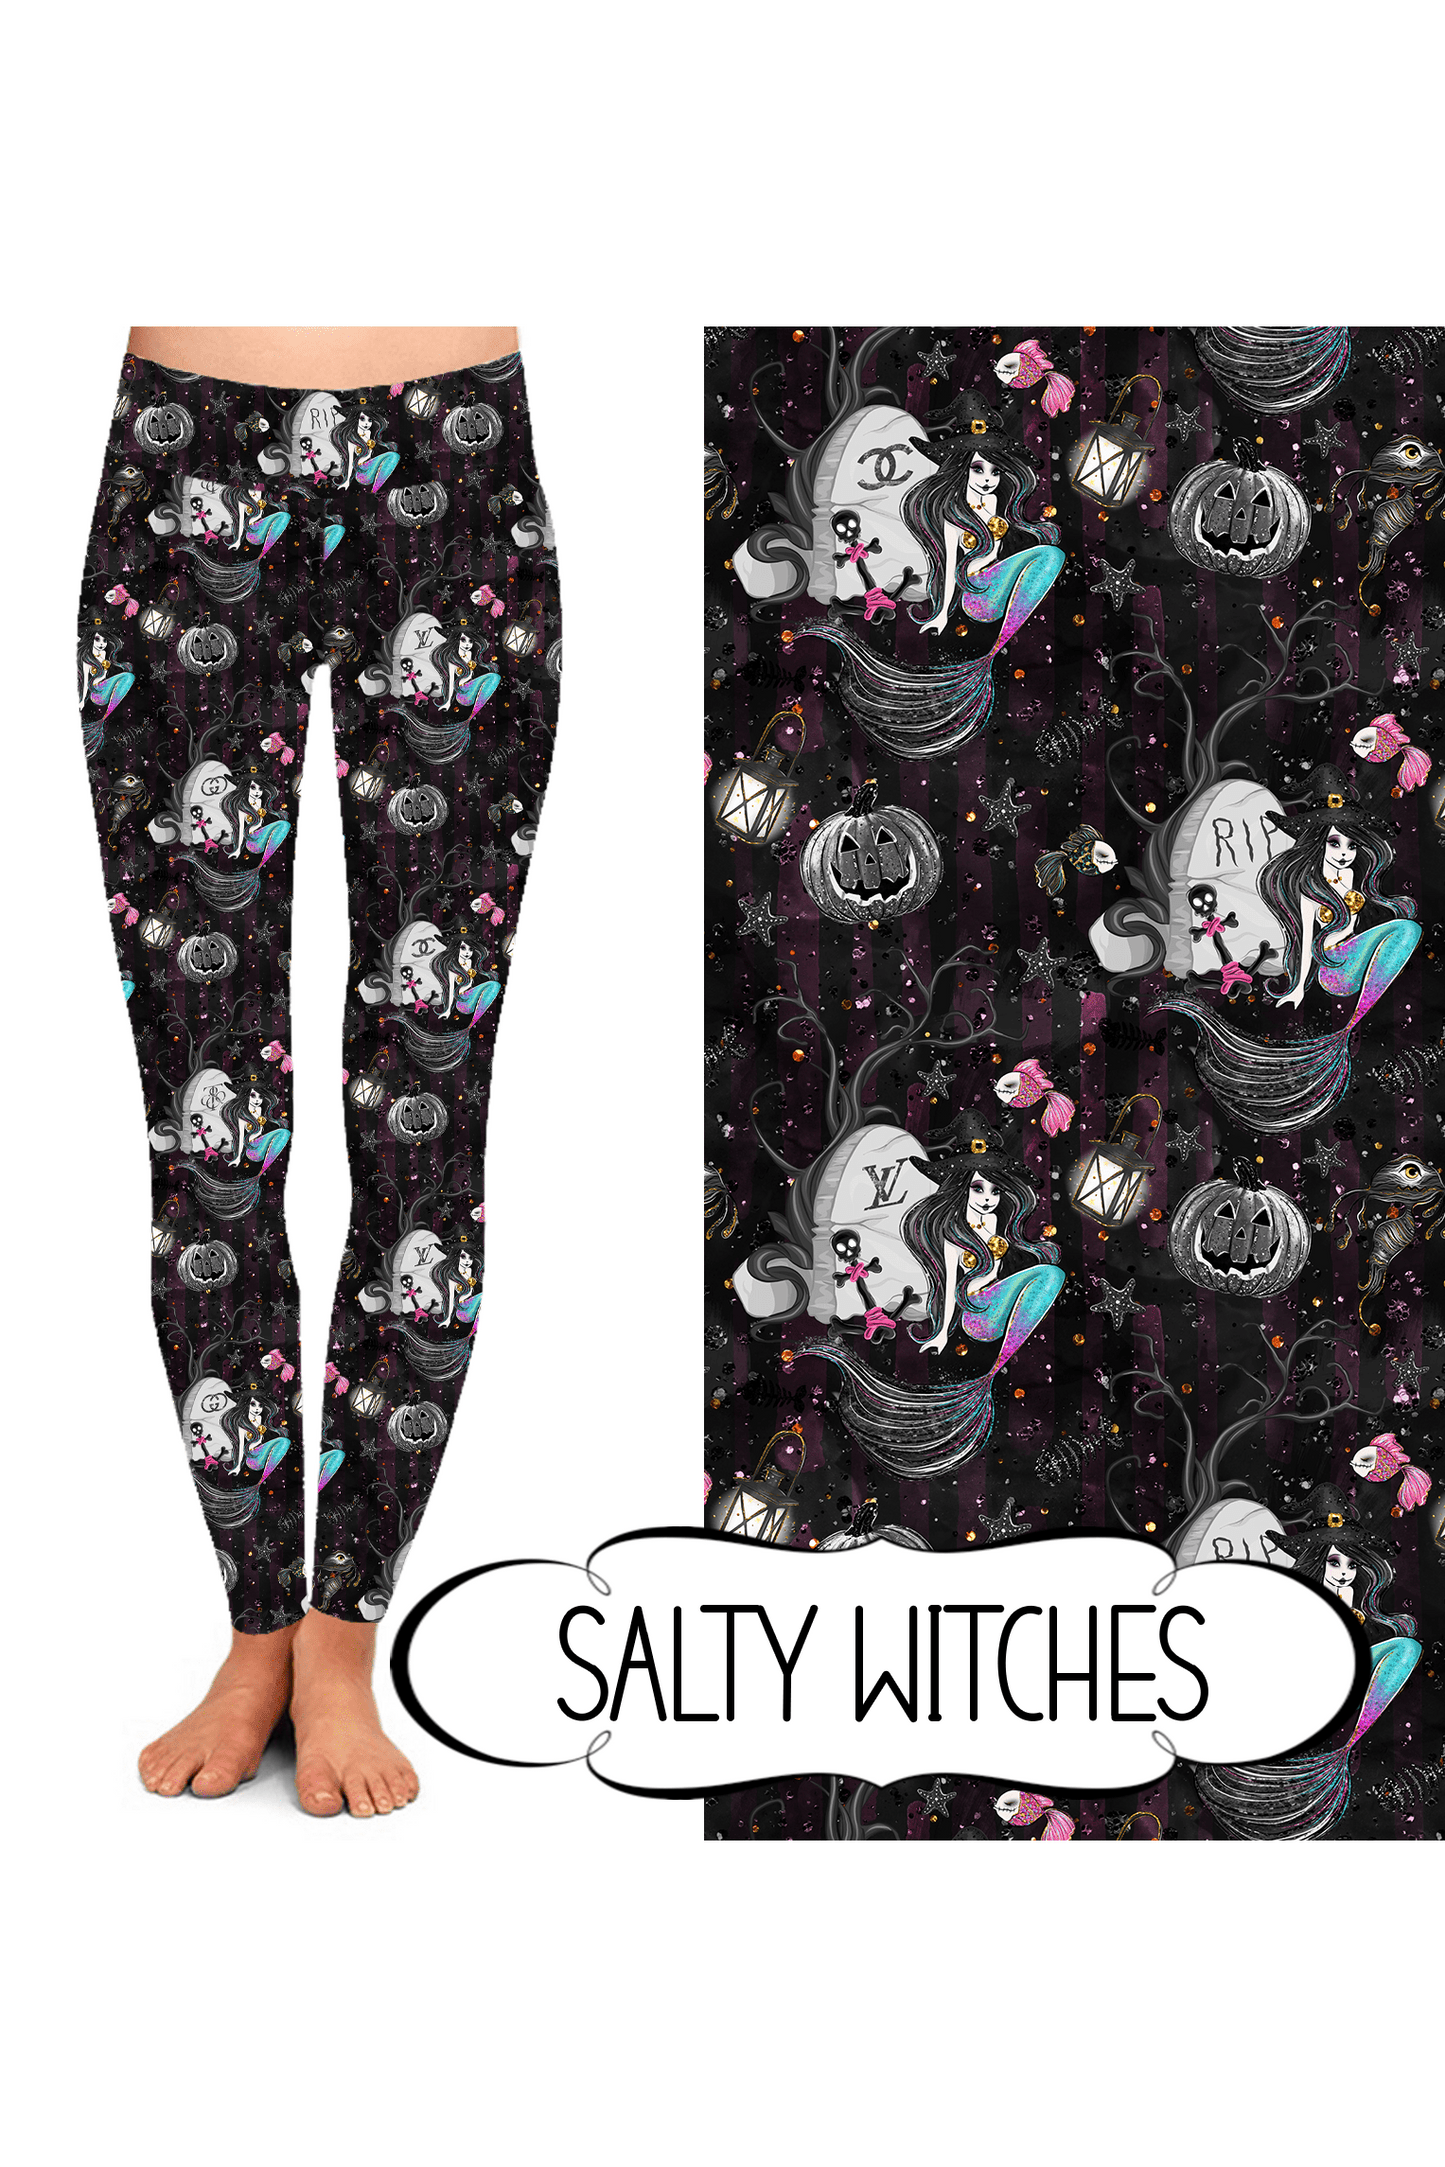 Yoga Style Leggings - Salty Witches by Eleven & Co.